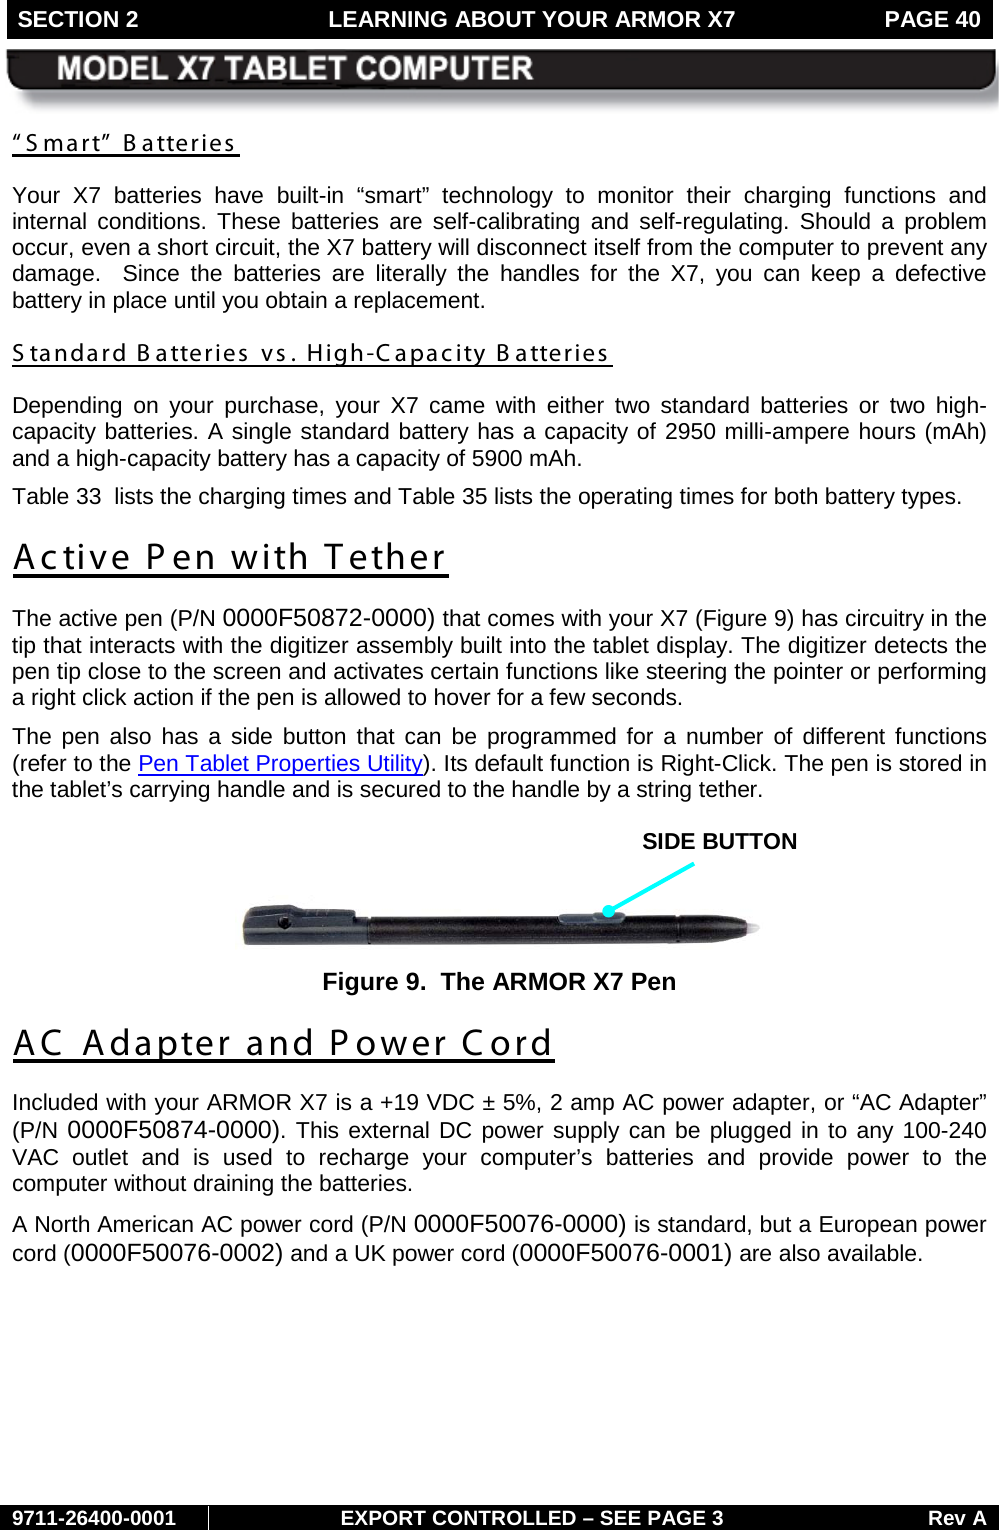 SECTION 2 LEARNING ABOUT YOUR ARMOR X7  PAGE 40        9711-26400-0001 EXPORT CONTROLLED – SEE PAGE 3 Rev A “ S mart”  B atteries  Your X7 batteries have built-in “smart” technology to monitor their charging functions and internal conditions. These batteries are self-calibrating and self-regulating. Should a problem occur, even a short circuit, the X7 battery will disconnect itself from the computer to prevent any damage.  Since the batteries are literally the handles for the X7, you can keep a defective battery in place until you obtain a replacement. S tandard B atteries  vs . High-Capacity Batteries Depending on your purchase, your X7 came with either two standard batteries or two high-capacity batteries. A single standard battery has a capacity of 2950 milli-ampere hours (mAh) and a high-capacity battery has a capacity of 5900 mAh.  Table 33  lists the charging times and Table 35 lists the operating times for both battery types. Active P en with T ether The active pen (P/N 0000F50872-0000) that comes with your X7 (Figure 9) has circuitry in the tip that interacts with the digitizer assembly built into the tablet display. The digitizer detects the pen tip close to the screen and activates certain functions like steering the pointer or performing a right click action if the pen is allowed to hover for a few seconds.  The pen also has a side button that can be programmed for a number of different functions (refer to the Pen Tablet Properties Utility). Its default function is Right-Click. The pen is stored in the tablet’s carrying handle and is secured to the handle by a string tether.   Figure 9.  The ARMOR X7 Pen AC Adapter and Power Cord Included with your ARMOR X7 is a +19 VDC ± 5%, 2 amp AC power adapter, or “AC Adapter” (P/N 0000F50874-0000). This external DC power supply can be plugged in to any 100-240 VAC outlet and is used to recharge your computer’s batteries and provide power to the computer without draining the batteries.  A North American AC power cord (P/N 0000F50076-0000) is standard, but a European power cord (0000F50076-0002) and a UK power cord (0000F50076-0001) are also available.    SIDE BUTTON 